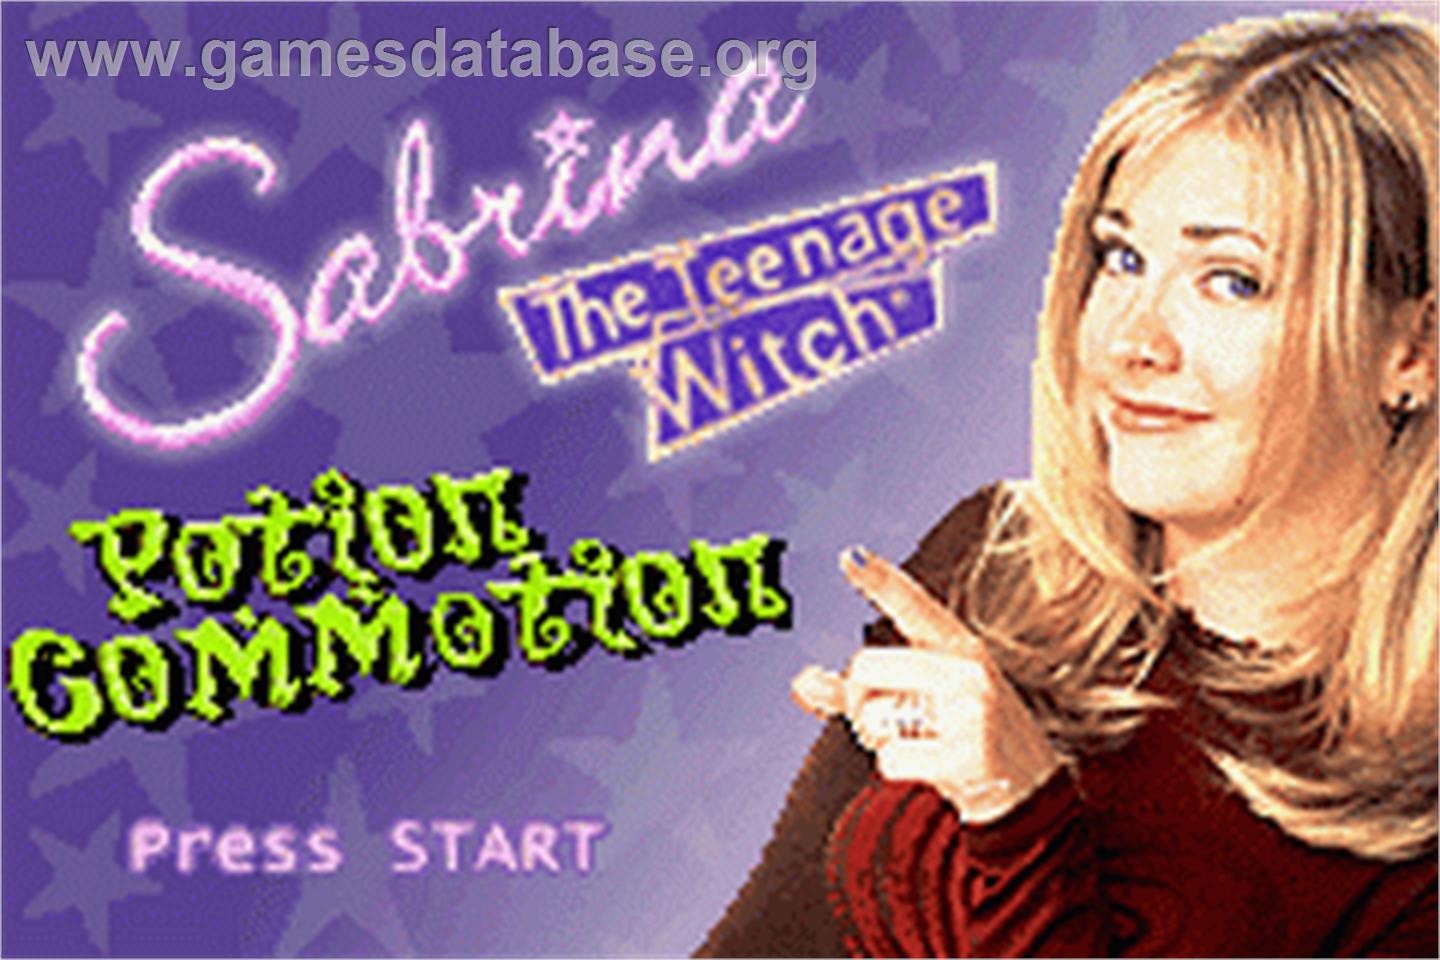 Sabrina, the Teenage Witch: Potion Commotion - Nintendo Game Boy Advance - Artwork - Title Screen